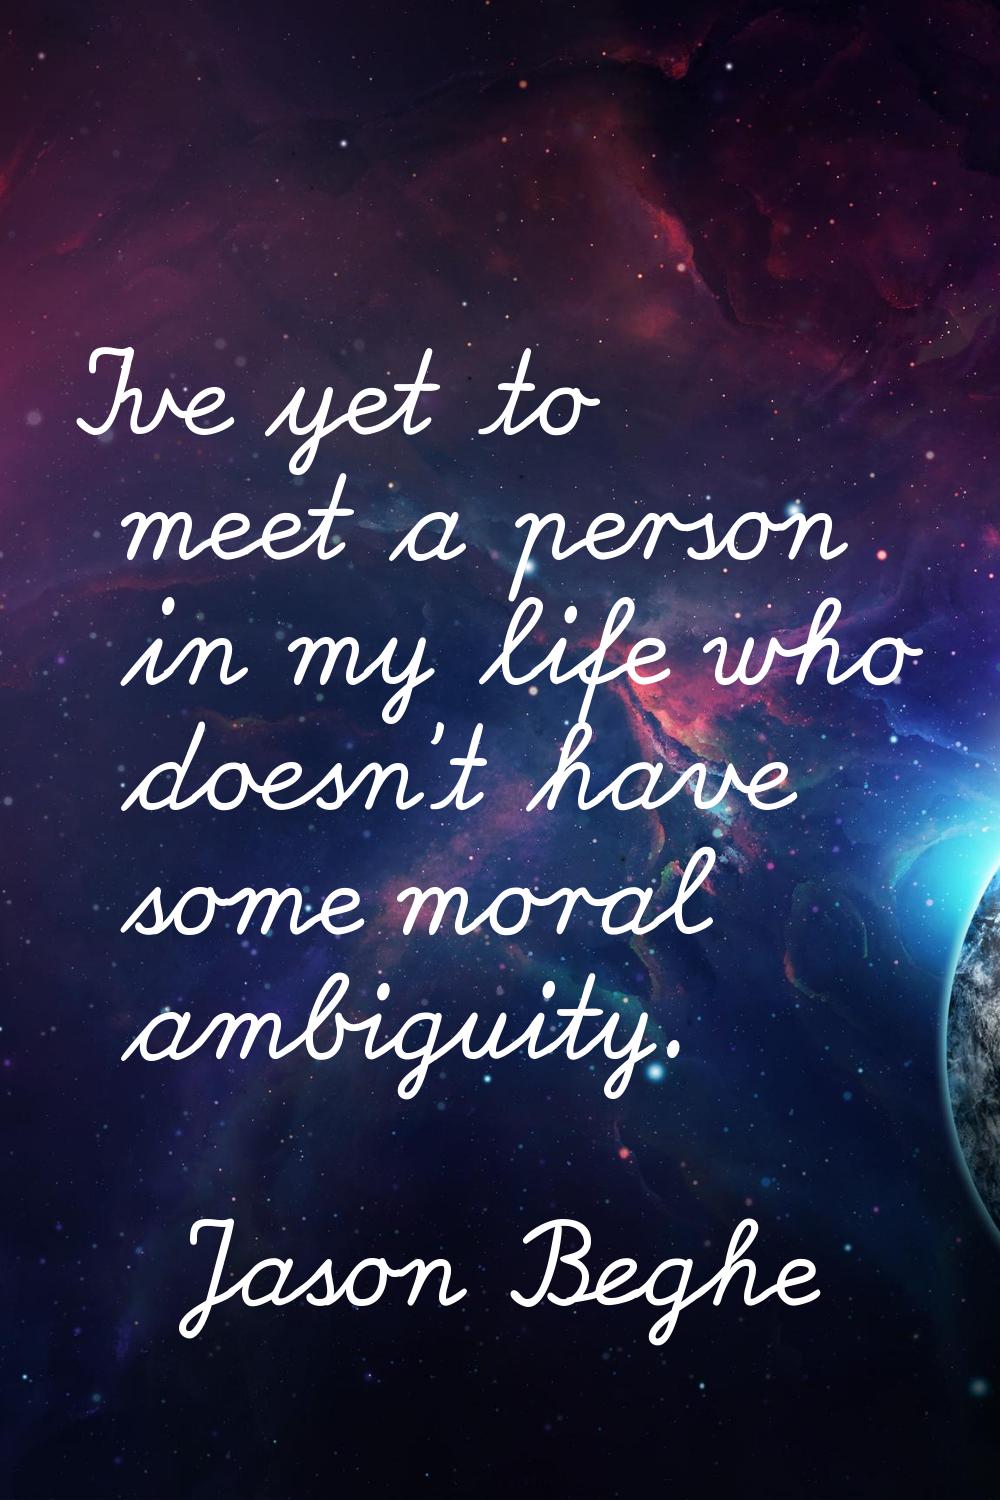 I've yet to meet a person in my life who doesn't have some moral ambiguity.